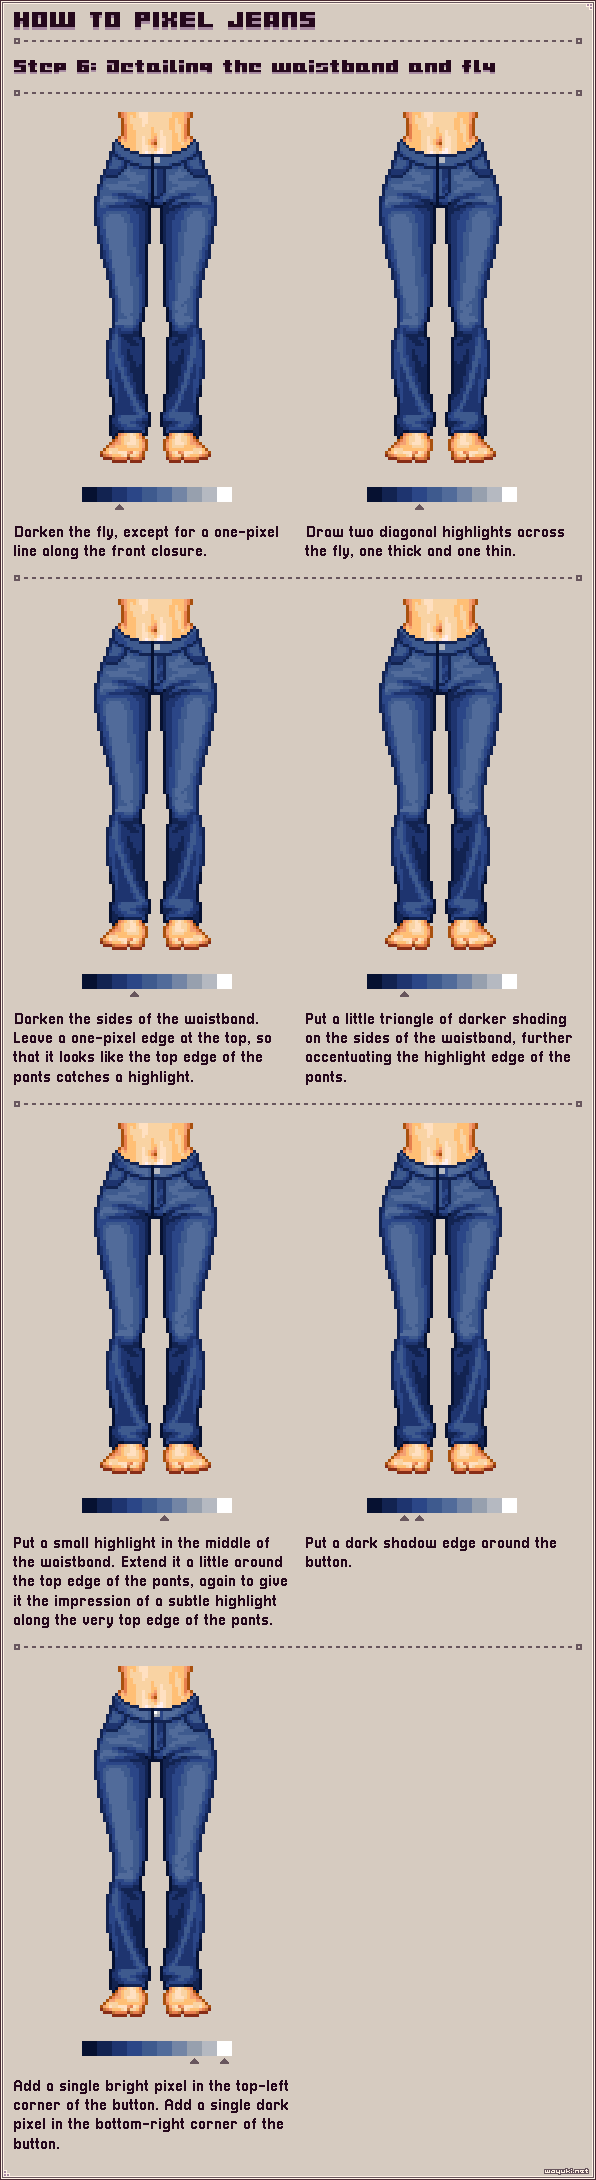 How to pixel jeans step 6